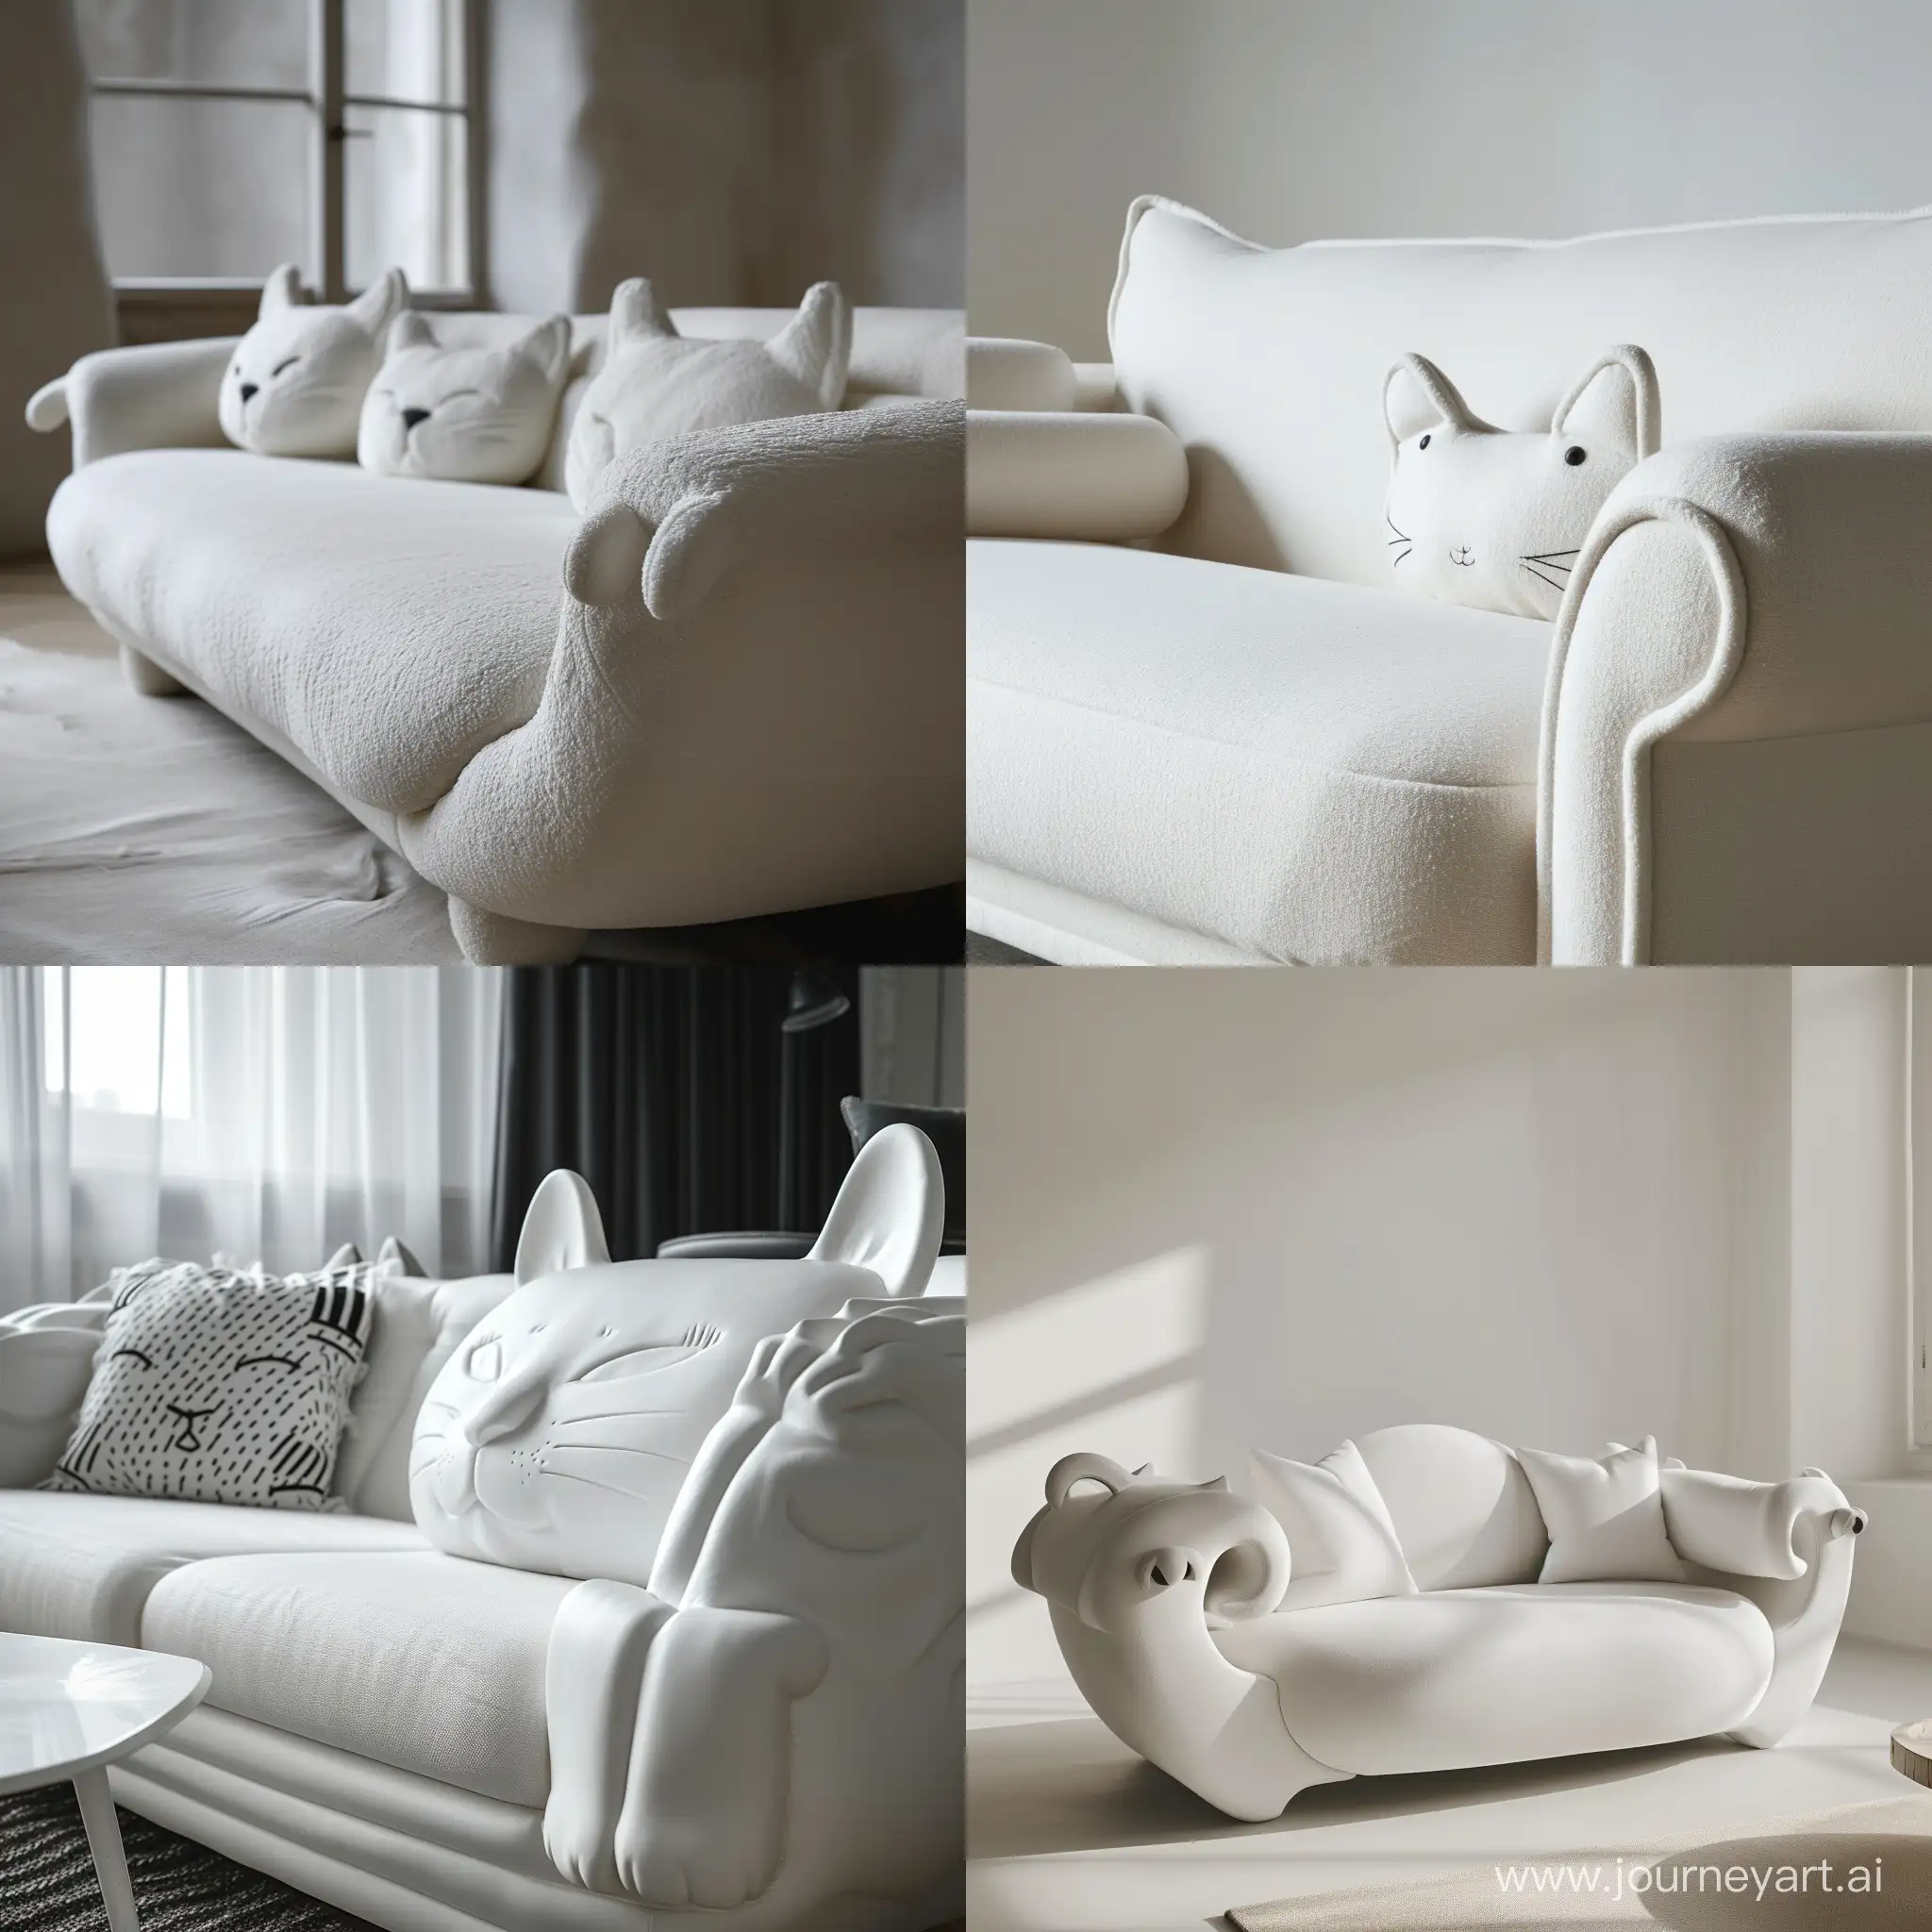 White sofa with handles in the shape of a cat's head